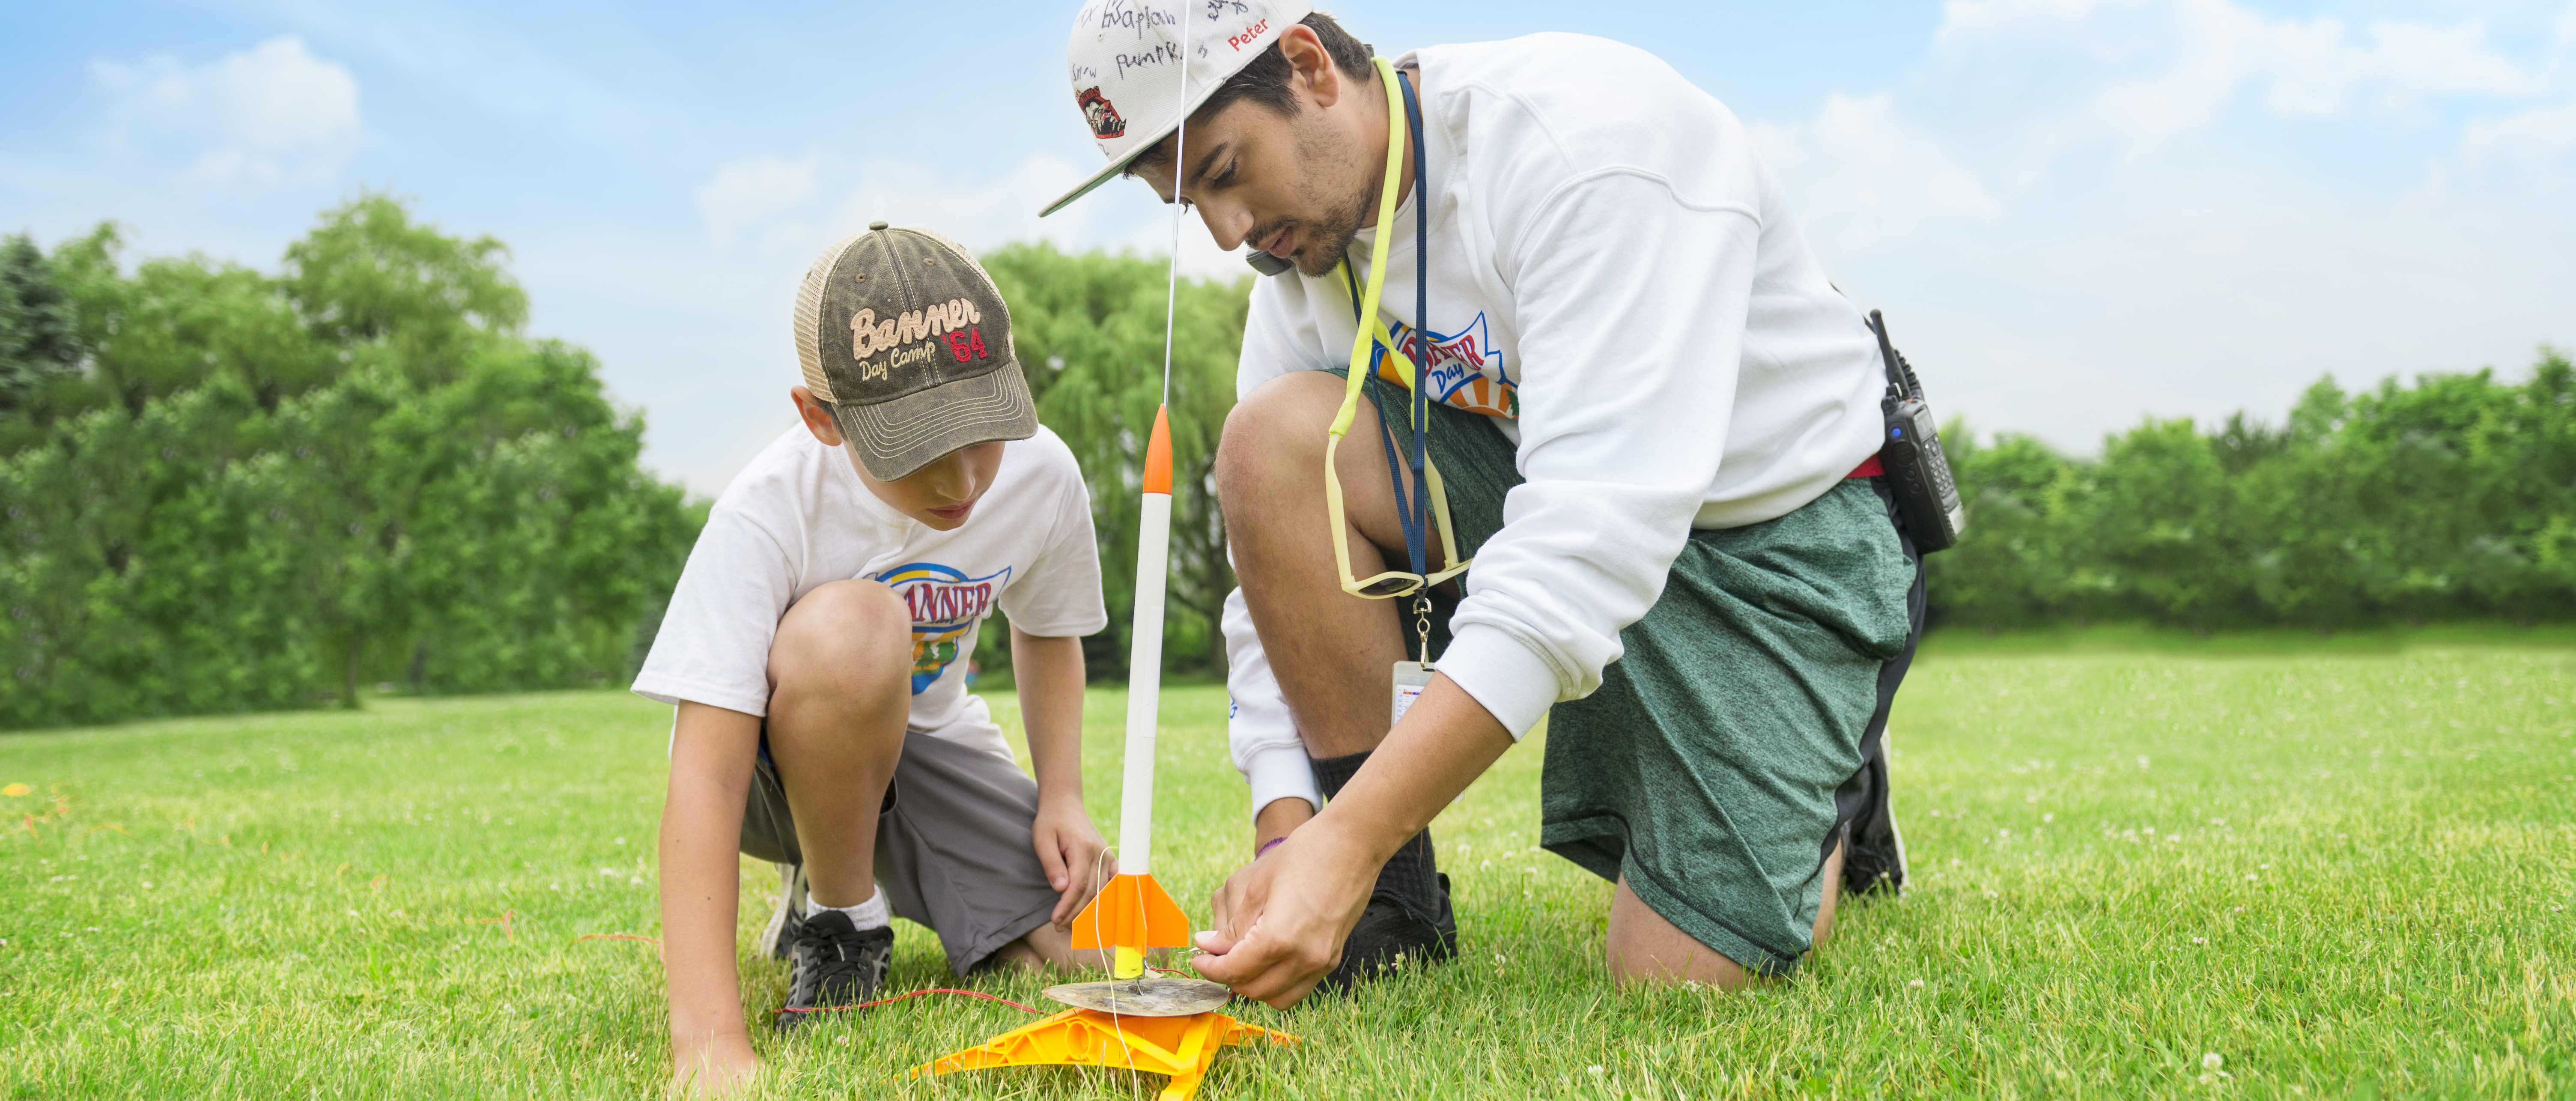 Male counselor helps male camper launch a rocket